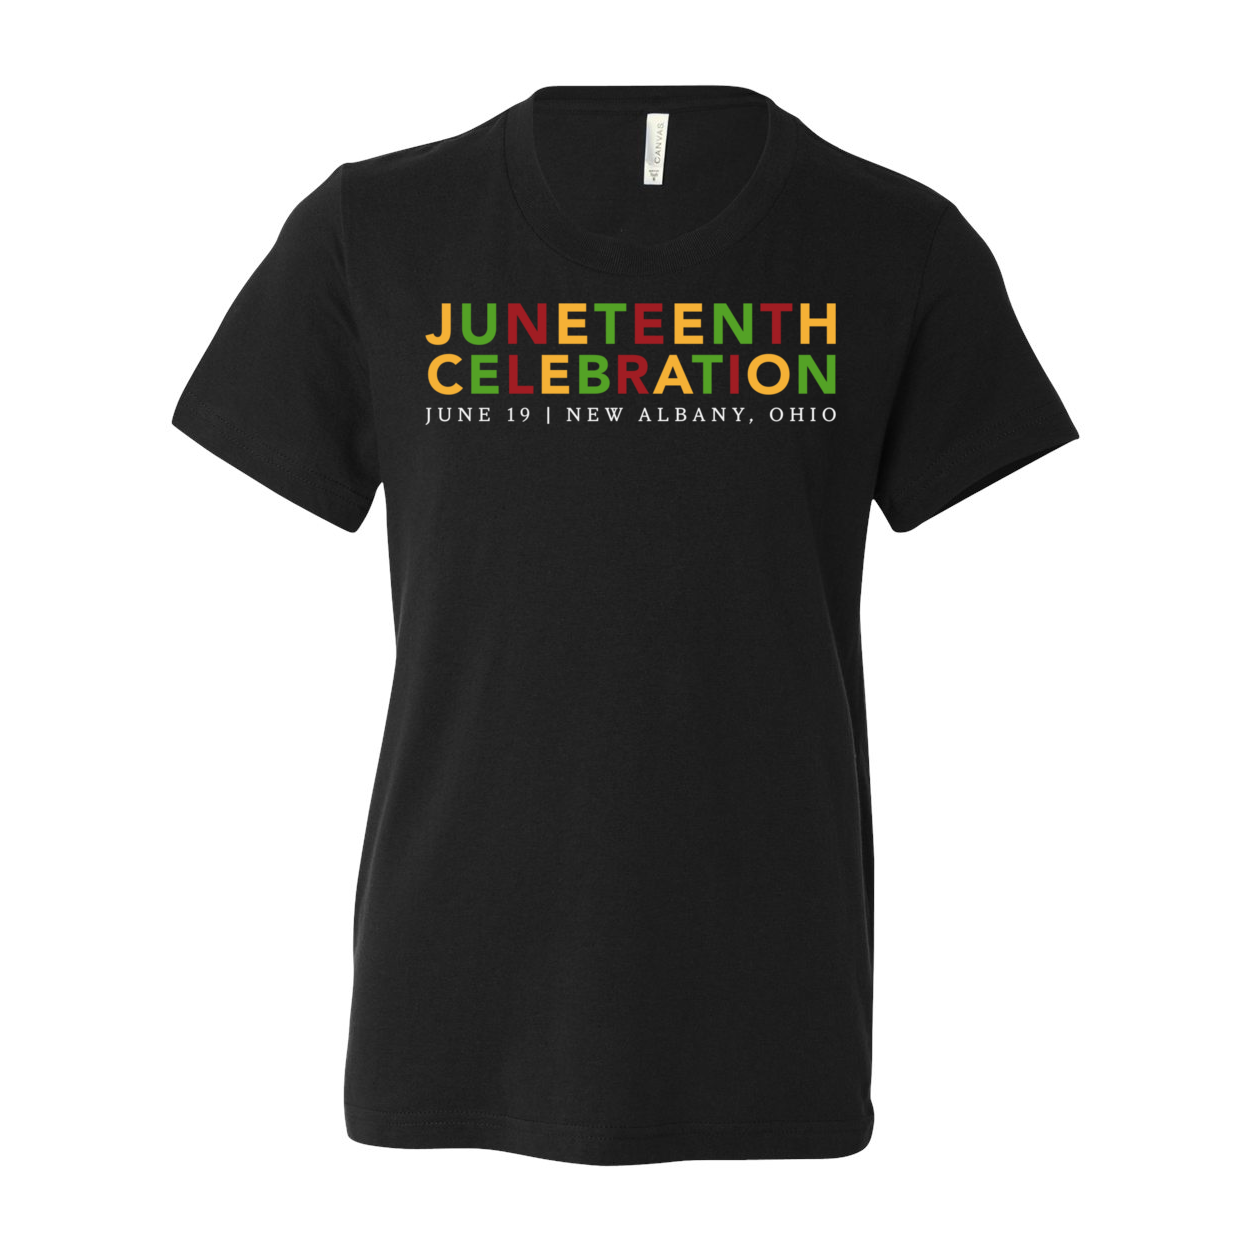 Youth Juneteenth Celebration Short Sleeve Graphic Tee - New Albany